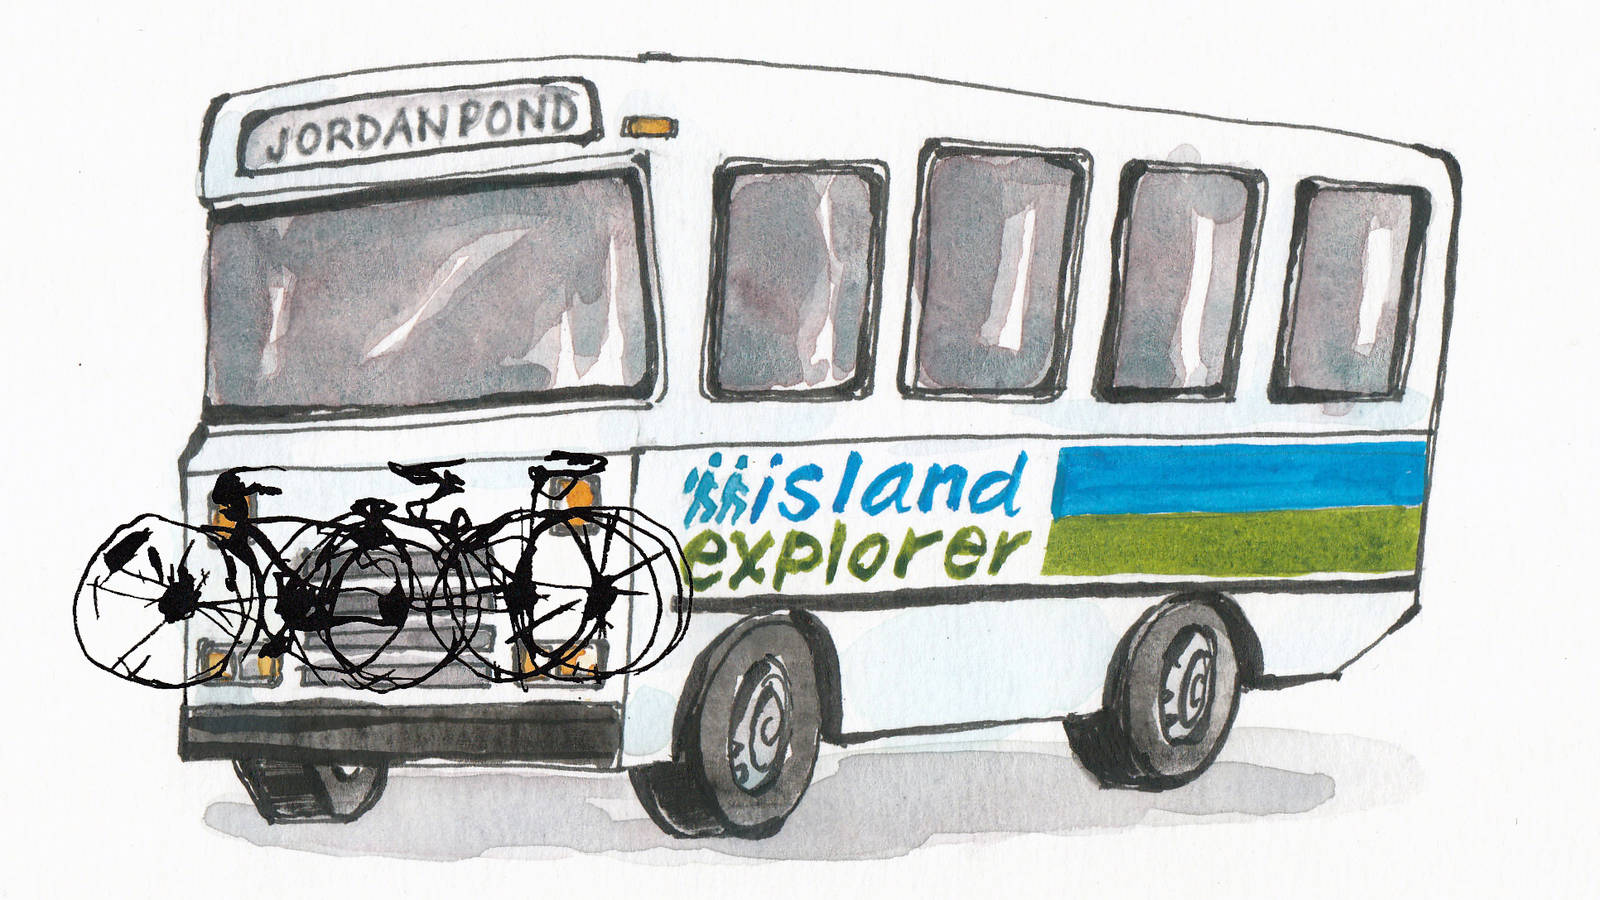 <h3 style="text-align: center; padding: 50px;"><span class="text-Intro-style">The Island Explorer shuttles offer free transportation to hiking trails, carriage roads and beaches, as well as villages just outside the park from late June through mid-October. (An entrance pass to the park is required.)</span></h3>